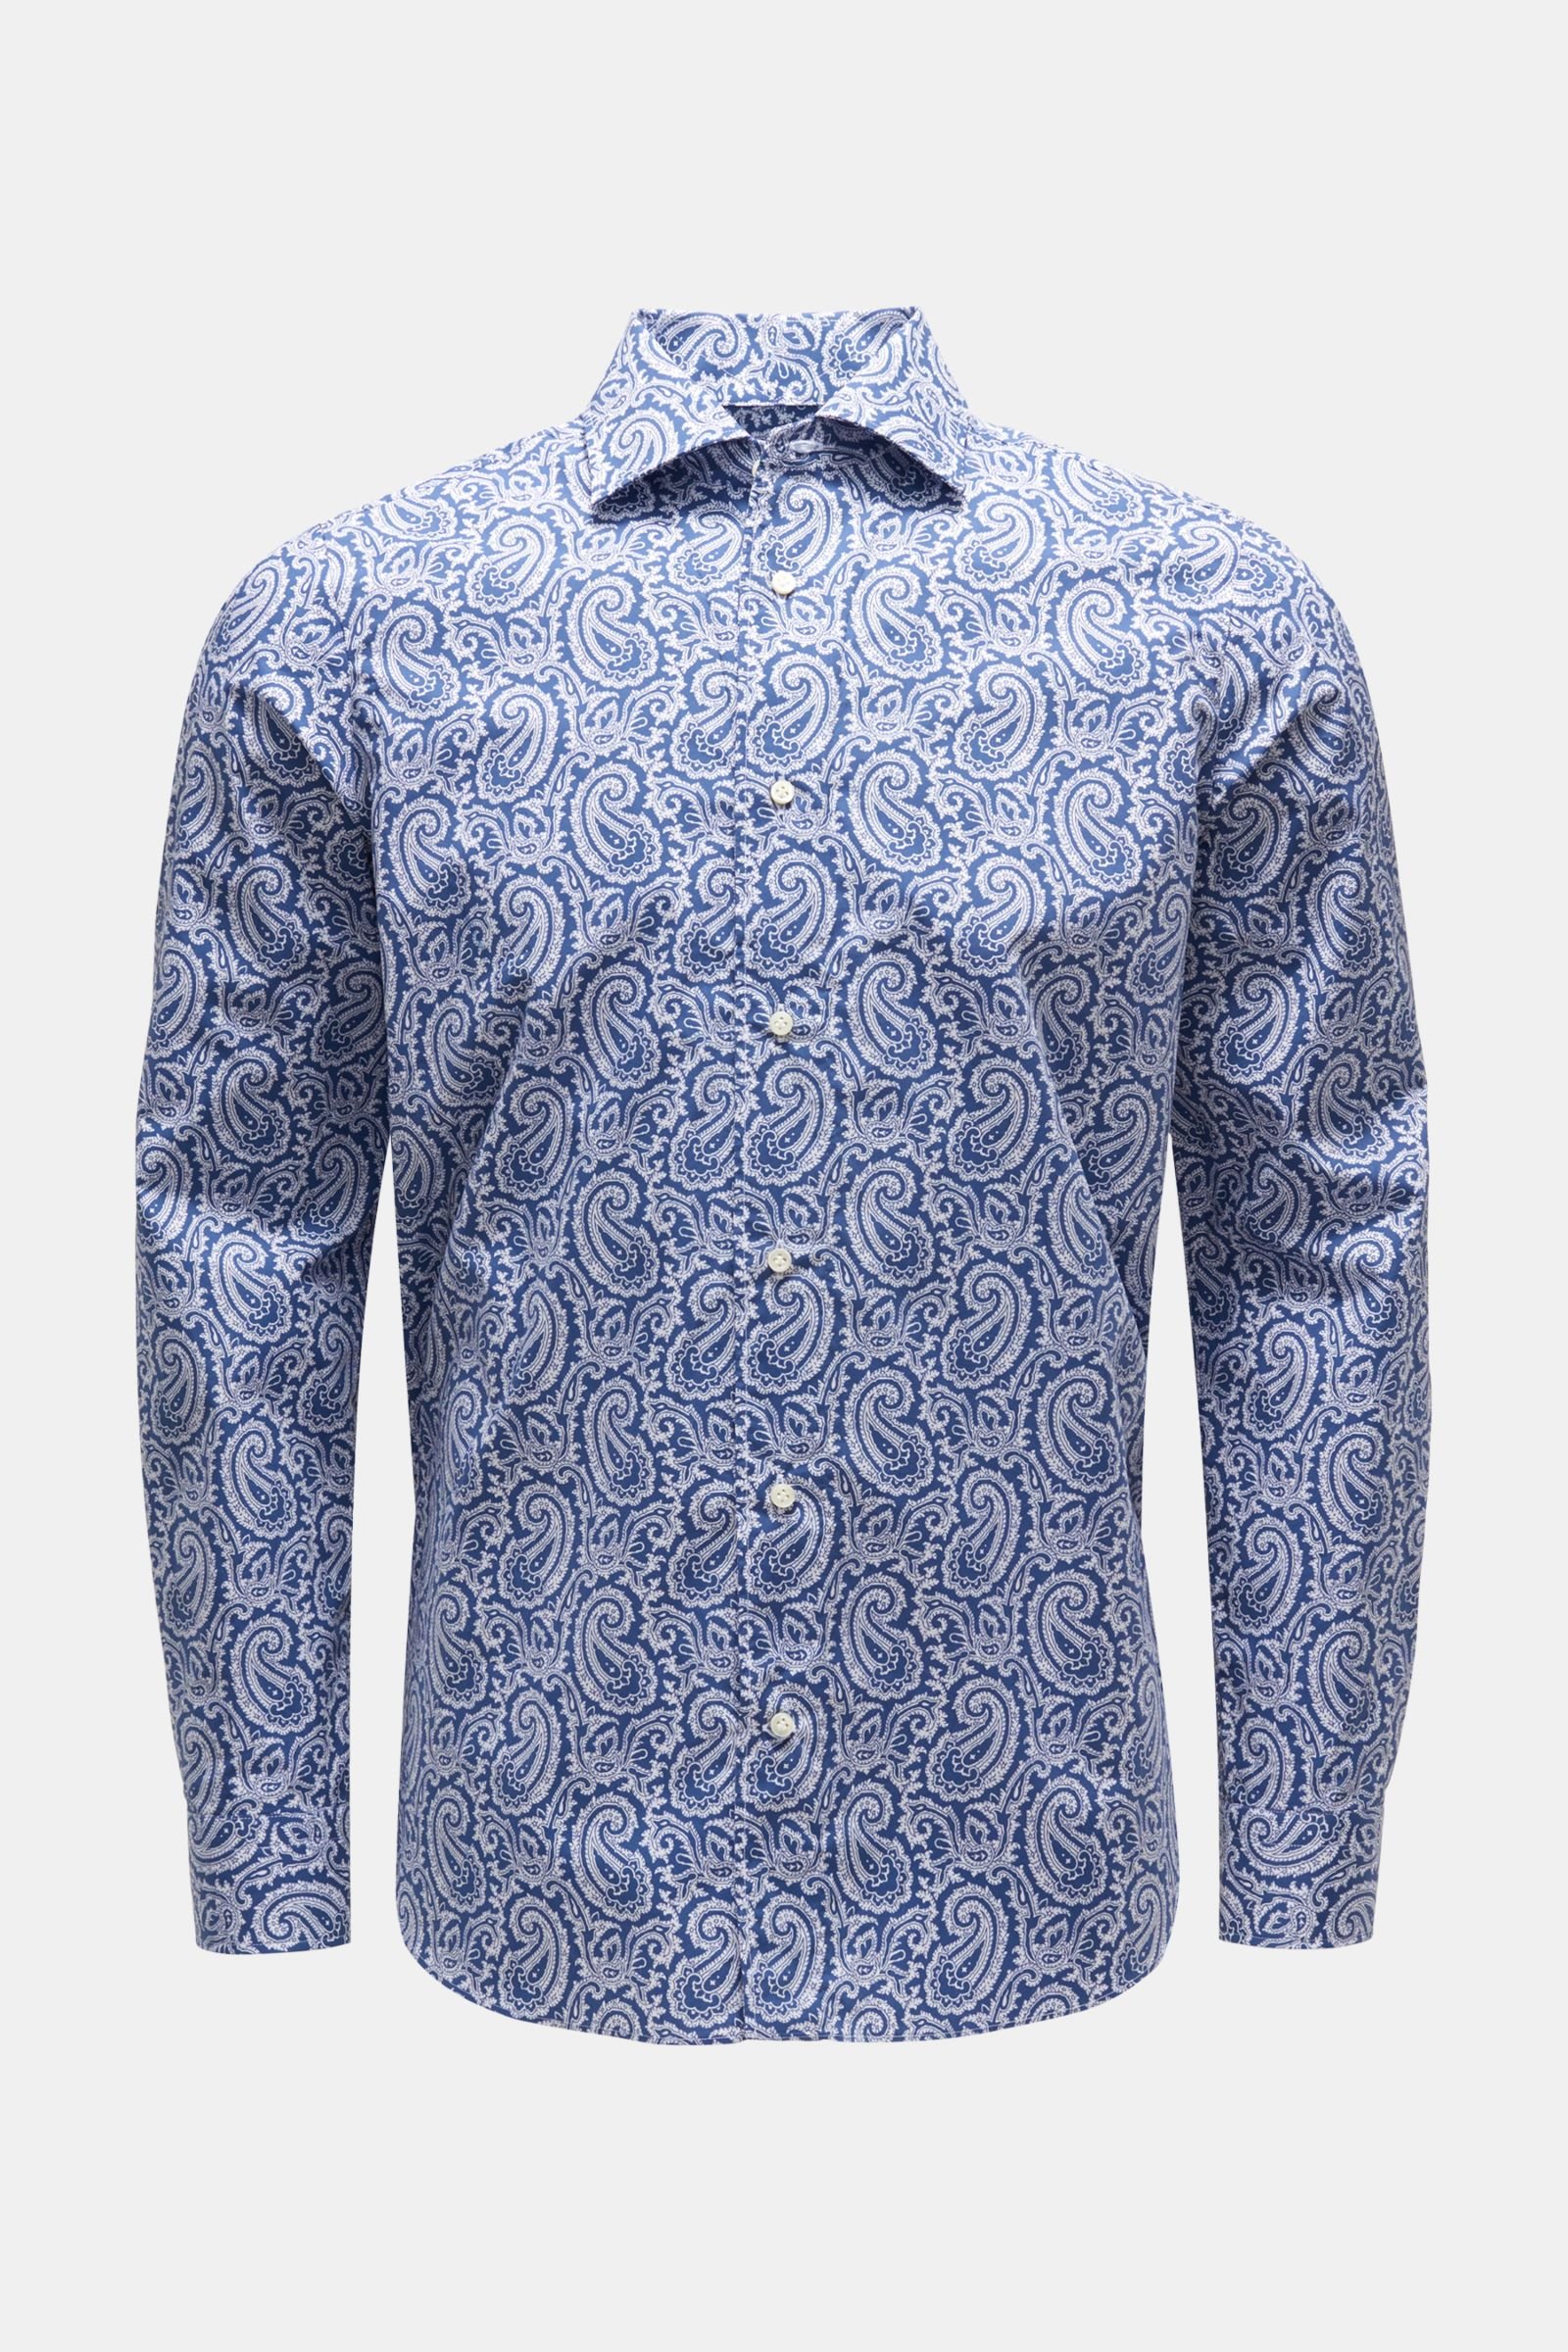 Casual shirt Kent collar grey-blue/white patterned